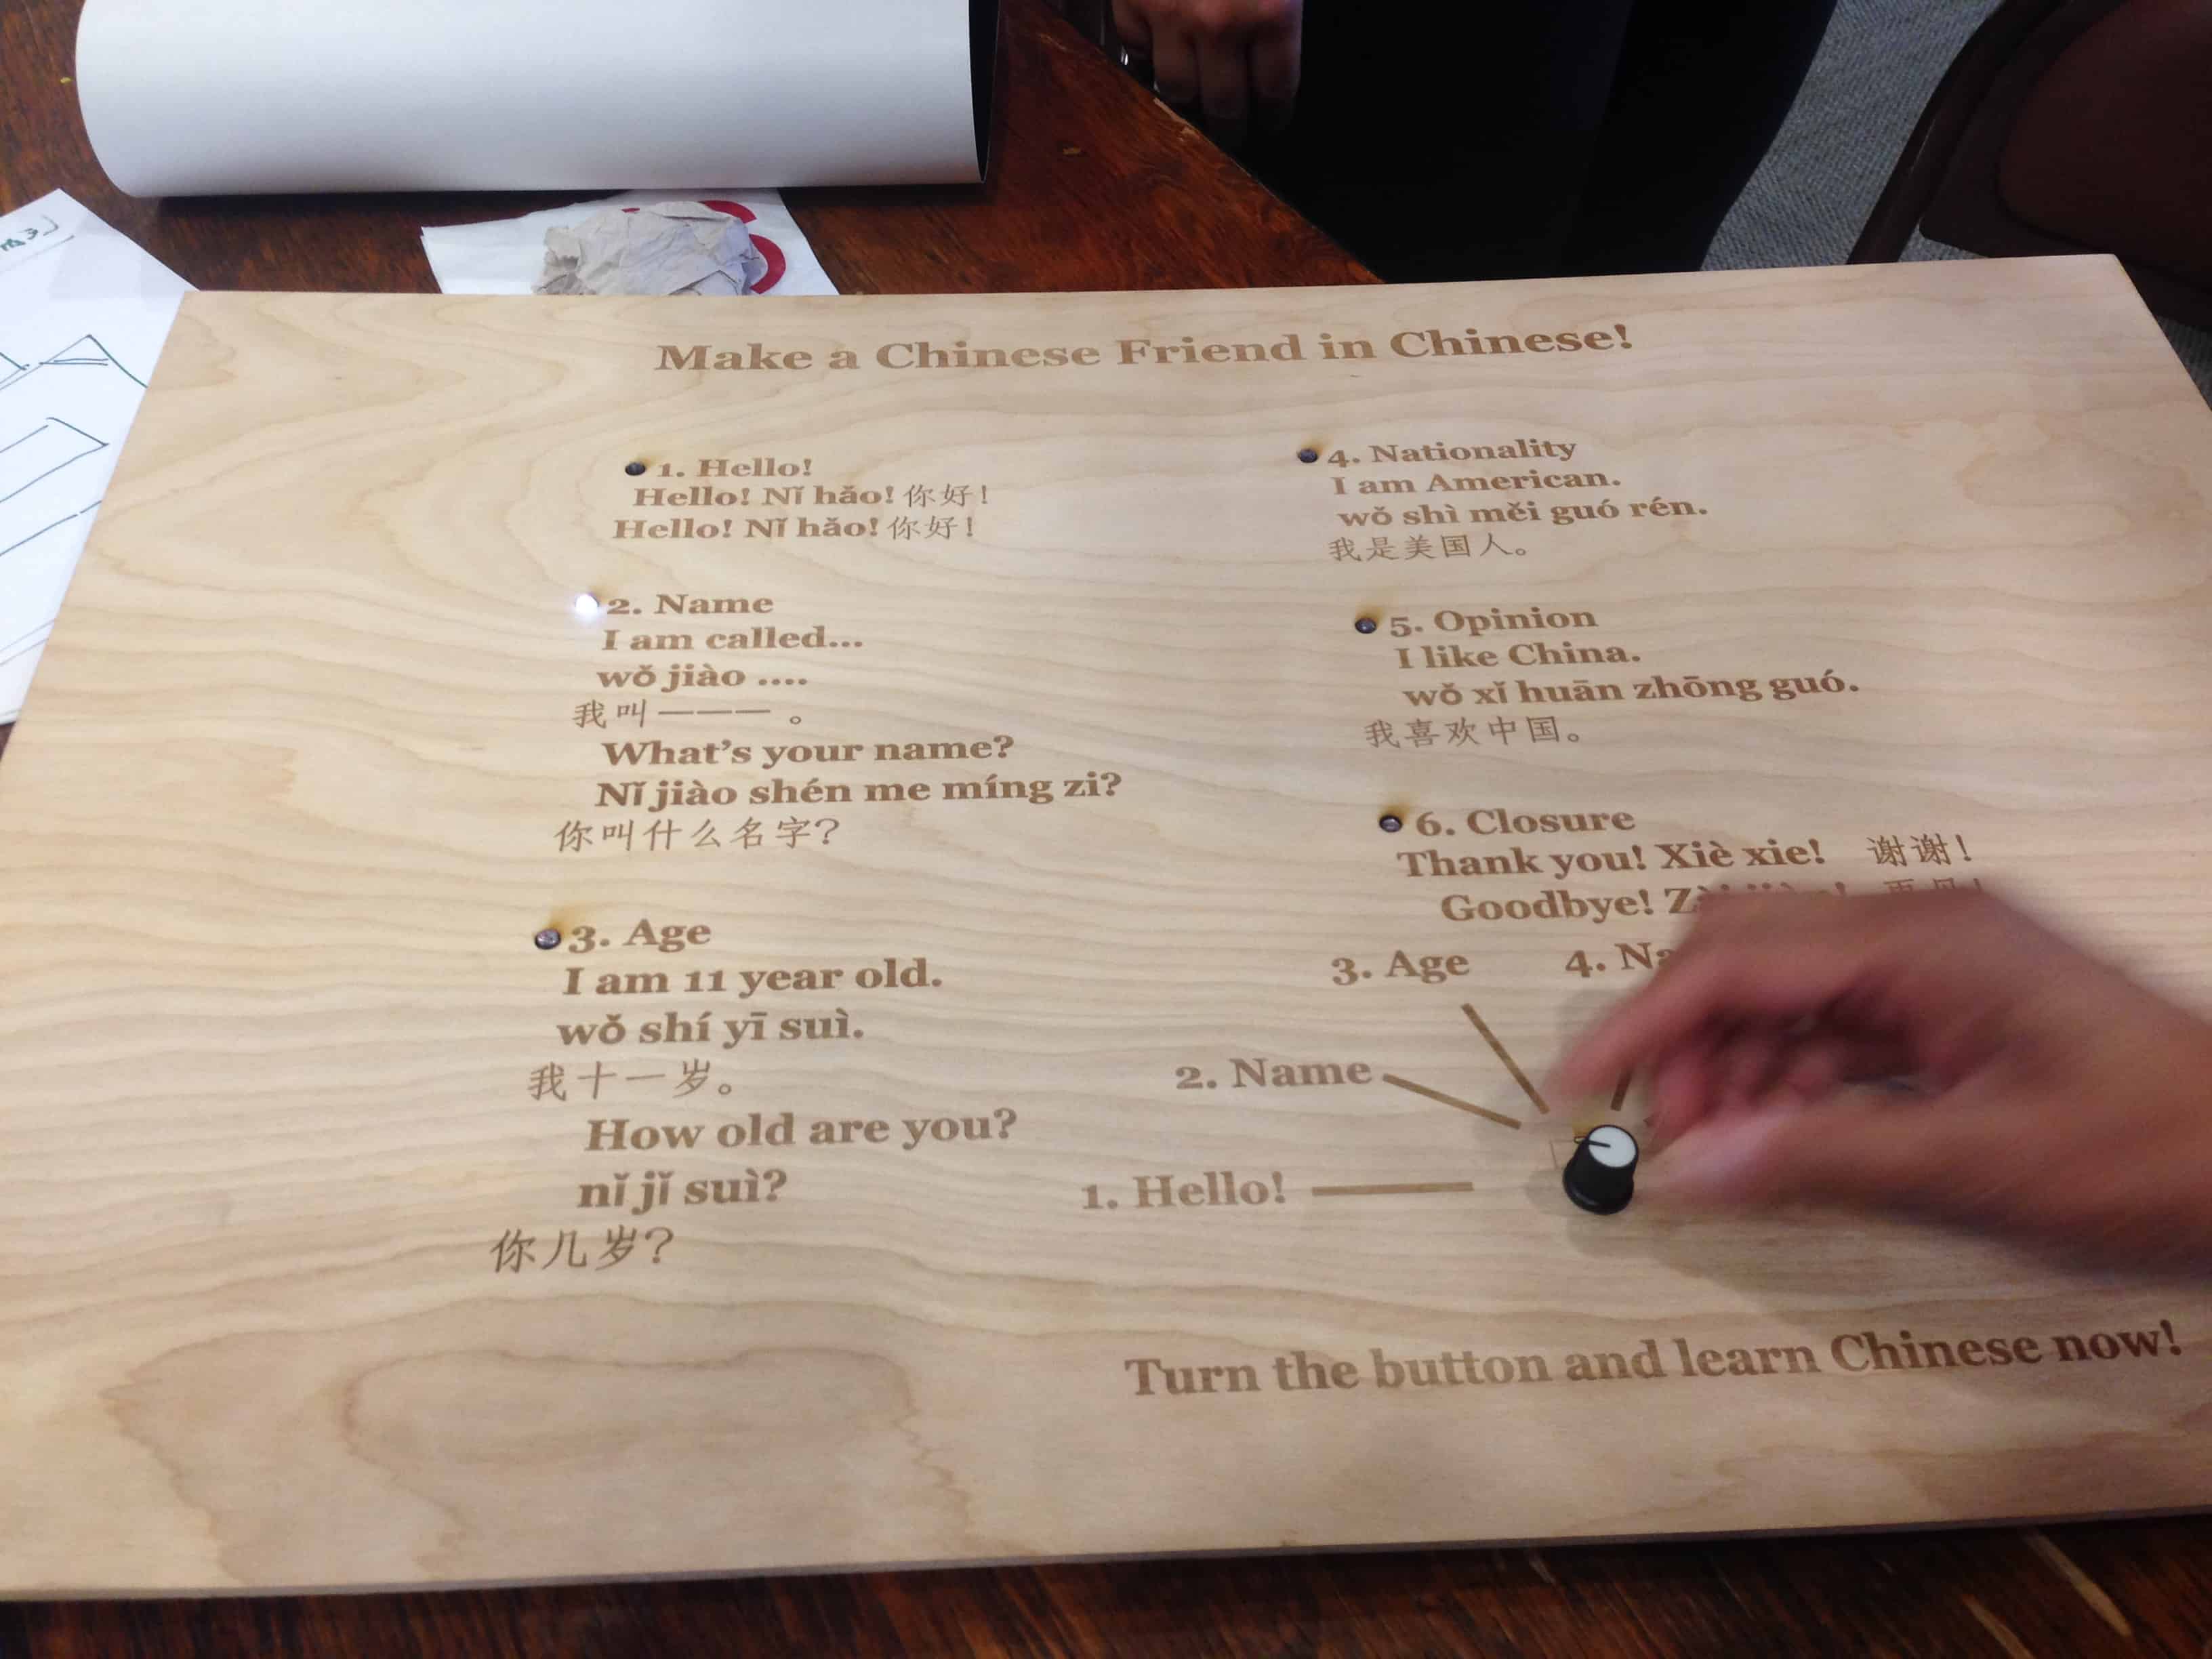 Board with English-Chinese tranlations and a knob